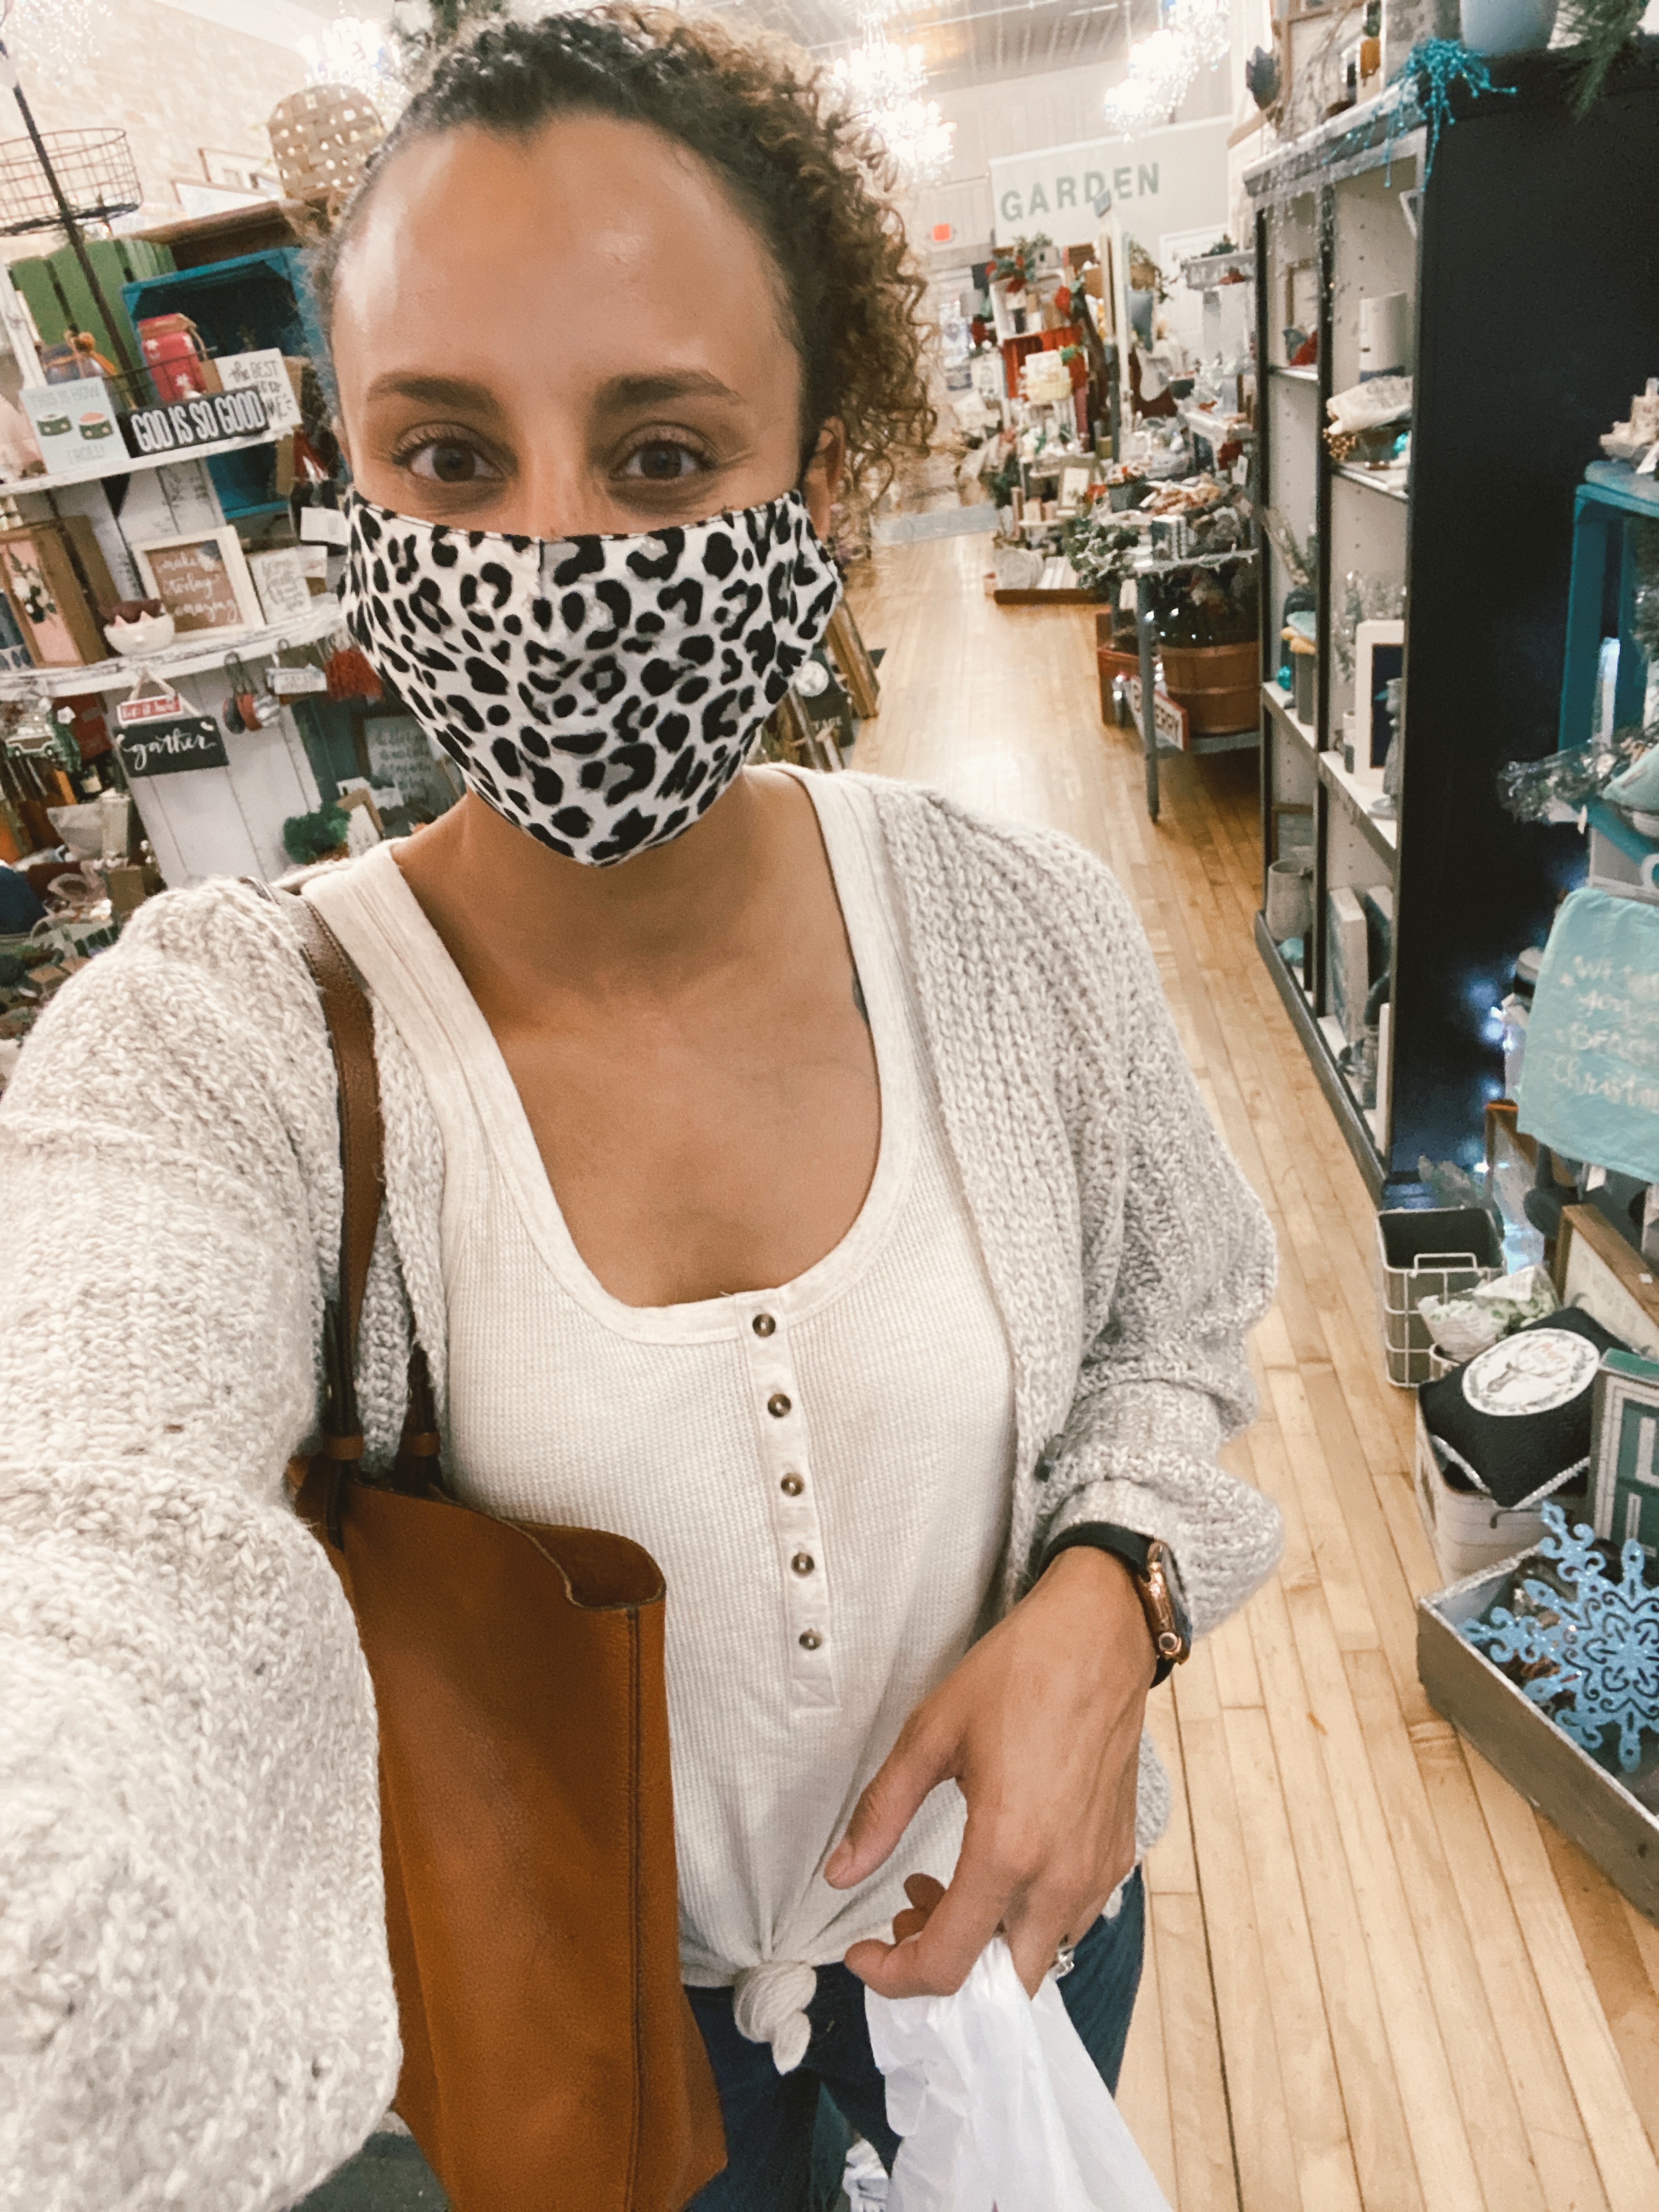 mixed race woman wearing a leopard print mask inside of a store